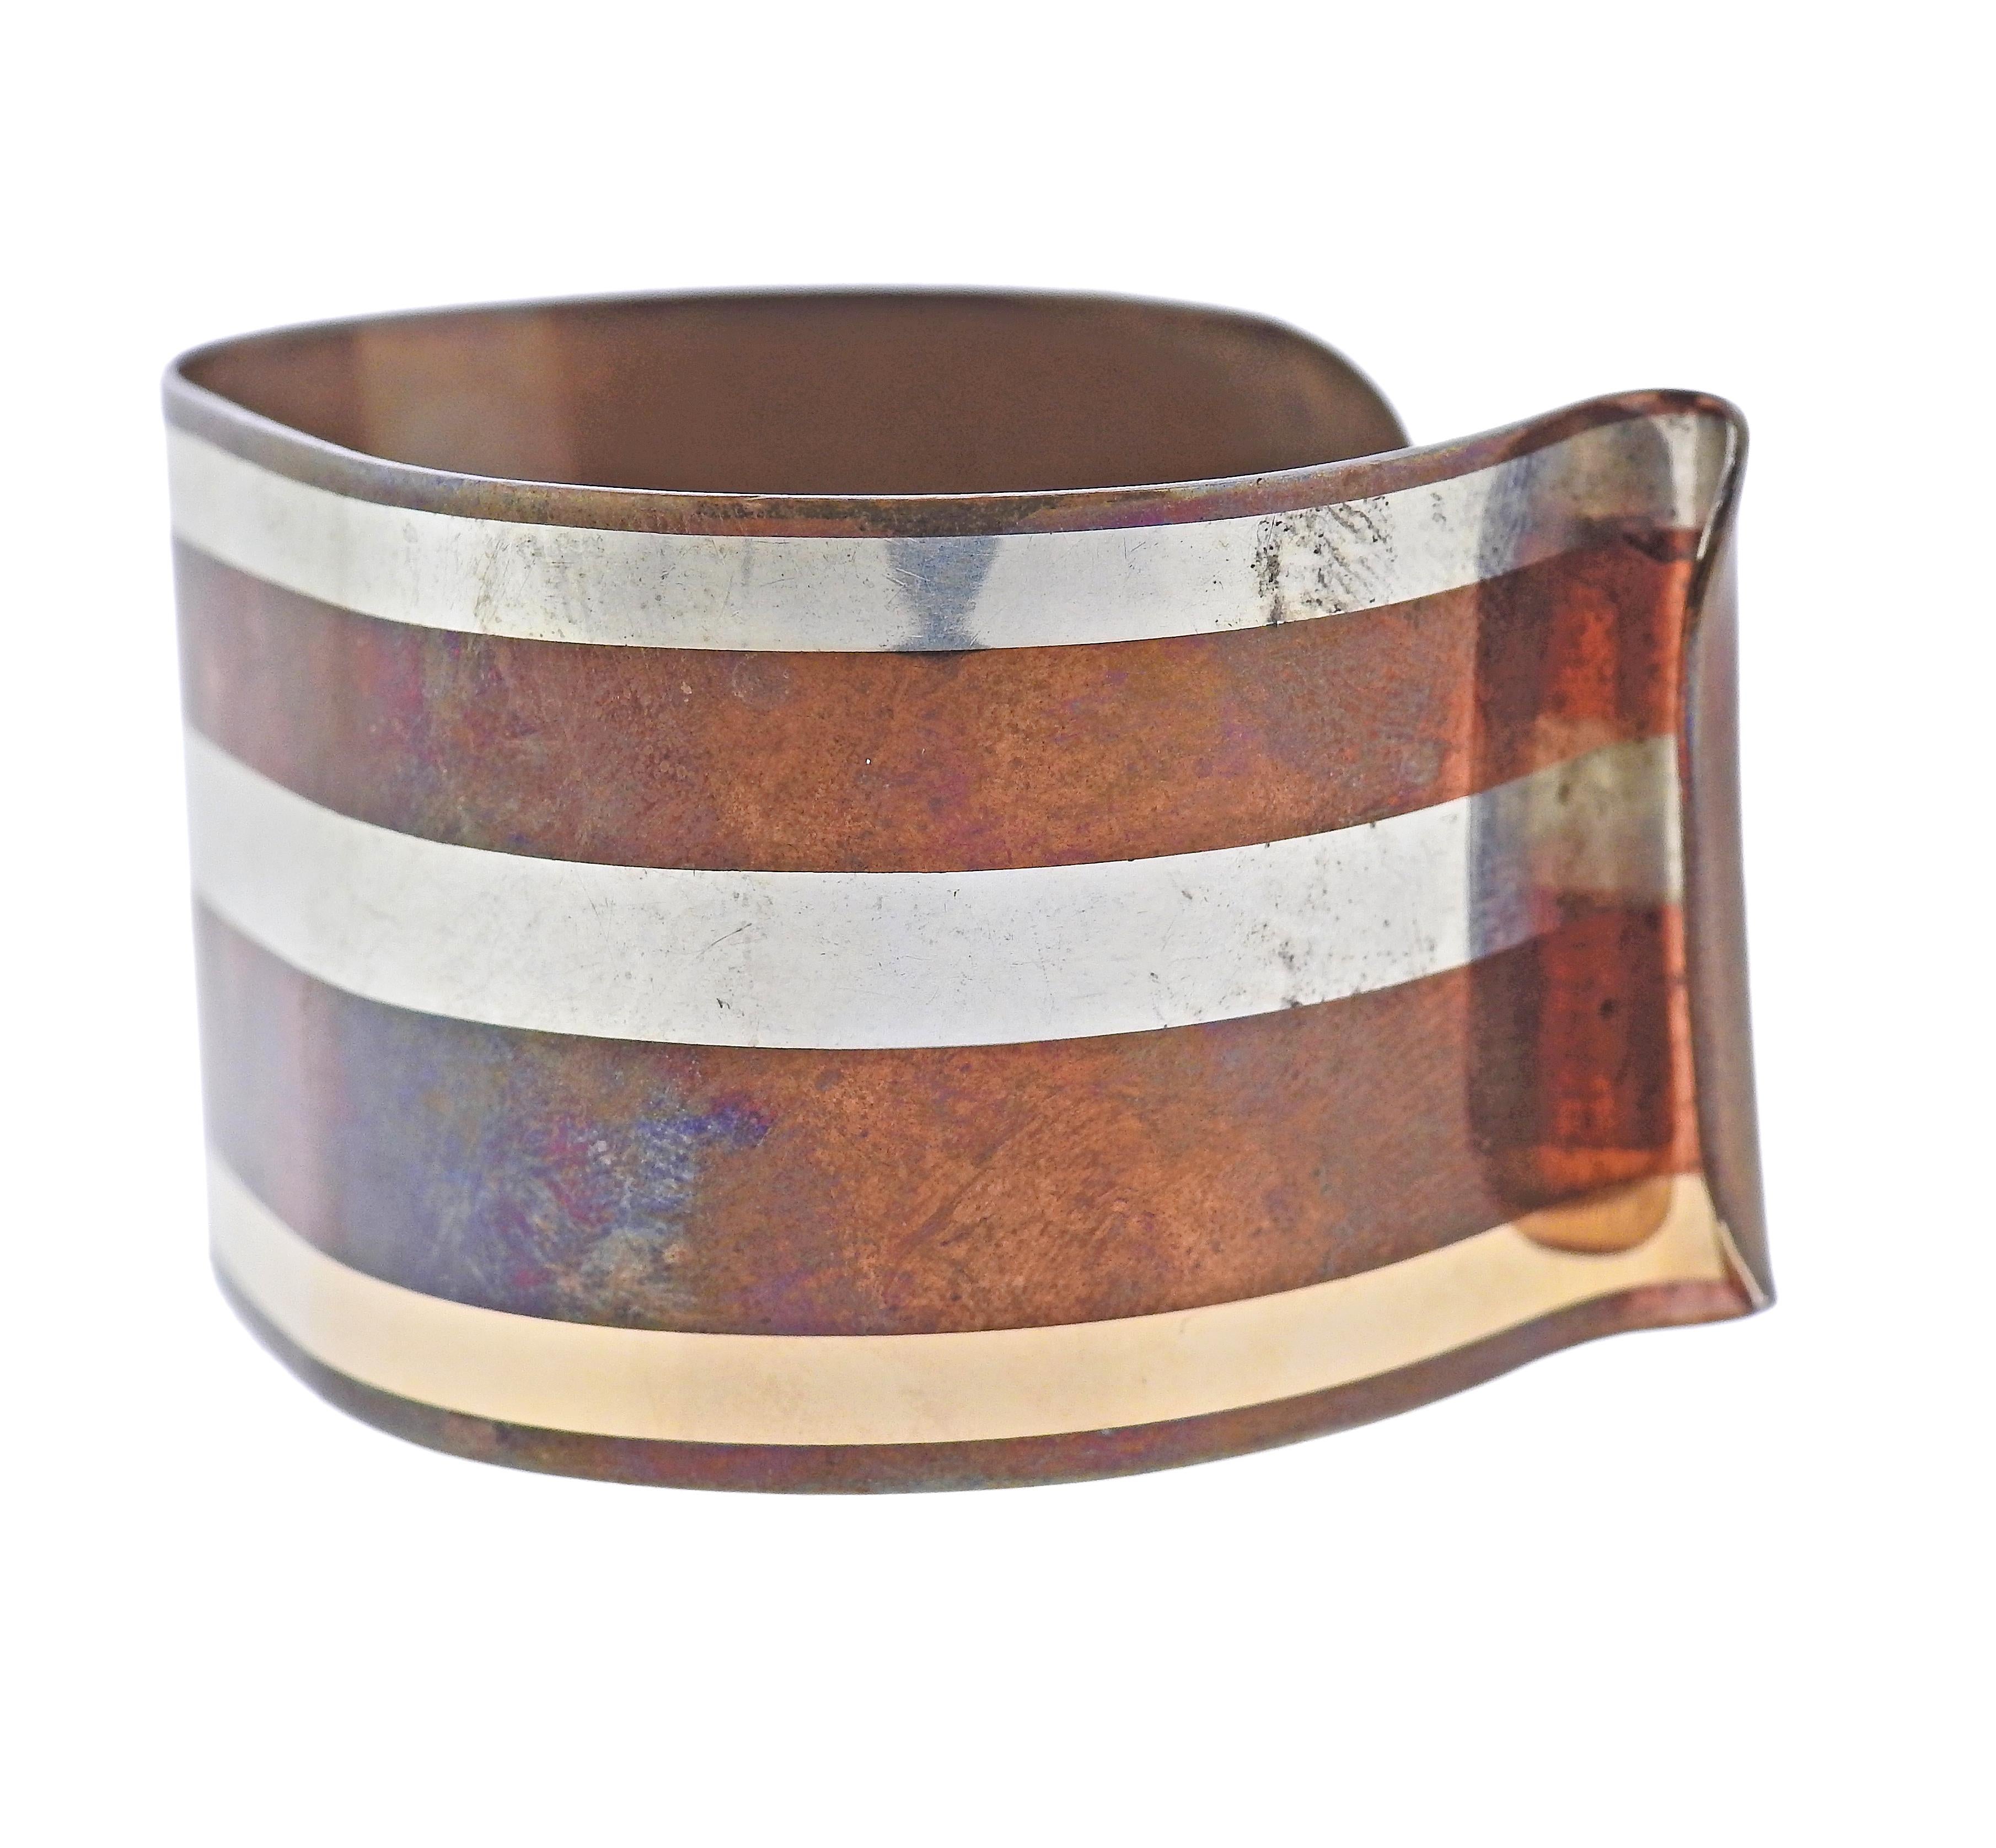 Iconic vintage Tiffany & Co mixed metal wide cuff, featuring copper, silver and gold. Bracelet will fit approx. 7-7.25